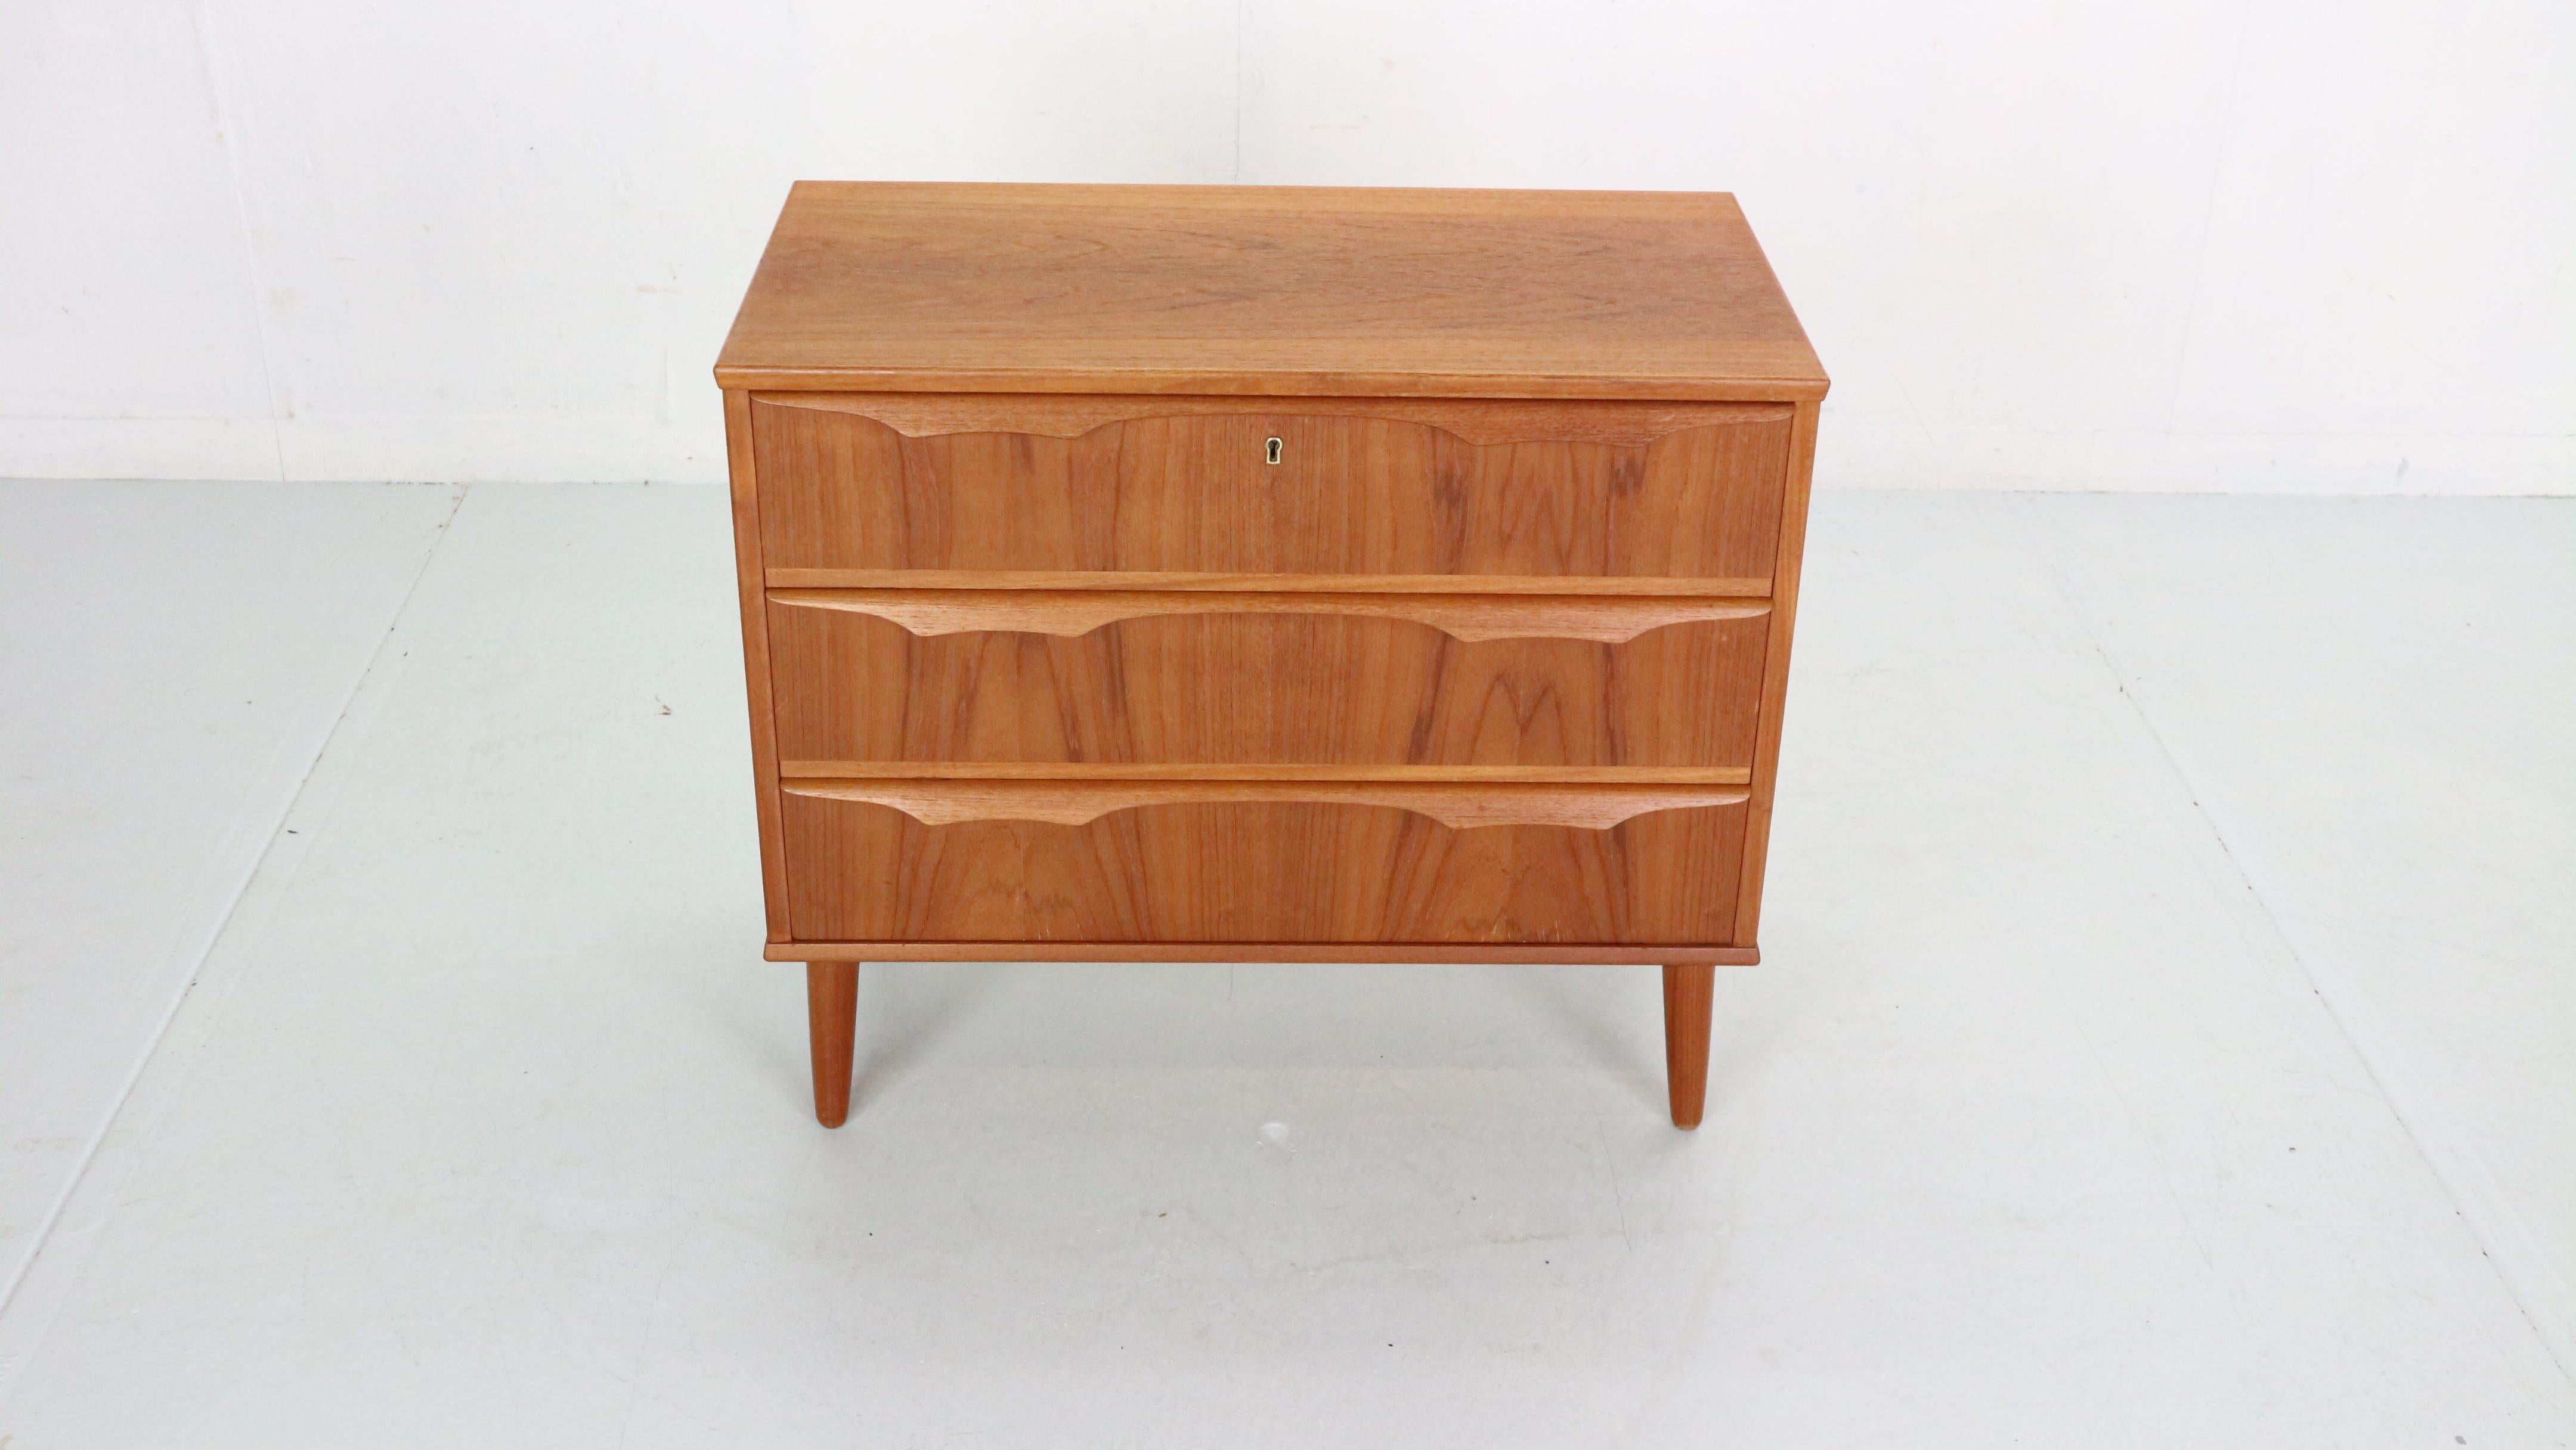 Scandinavian modern period a short chest of three drawers in teak with lipped handles by Trekanten Mobler. Denmark, 1960s.
A functional design where all the prominence falls on the expressive natural grain of the wood and sculptural handles.
The